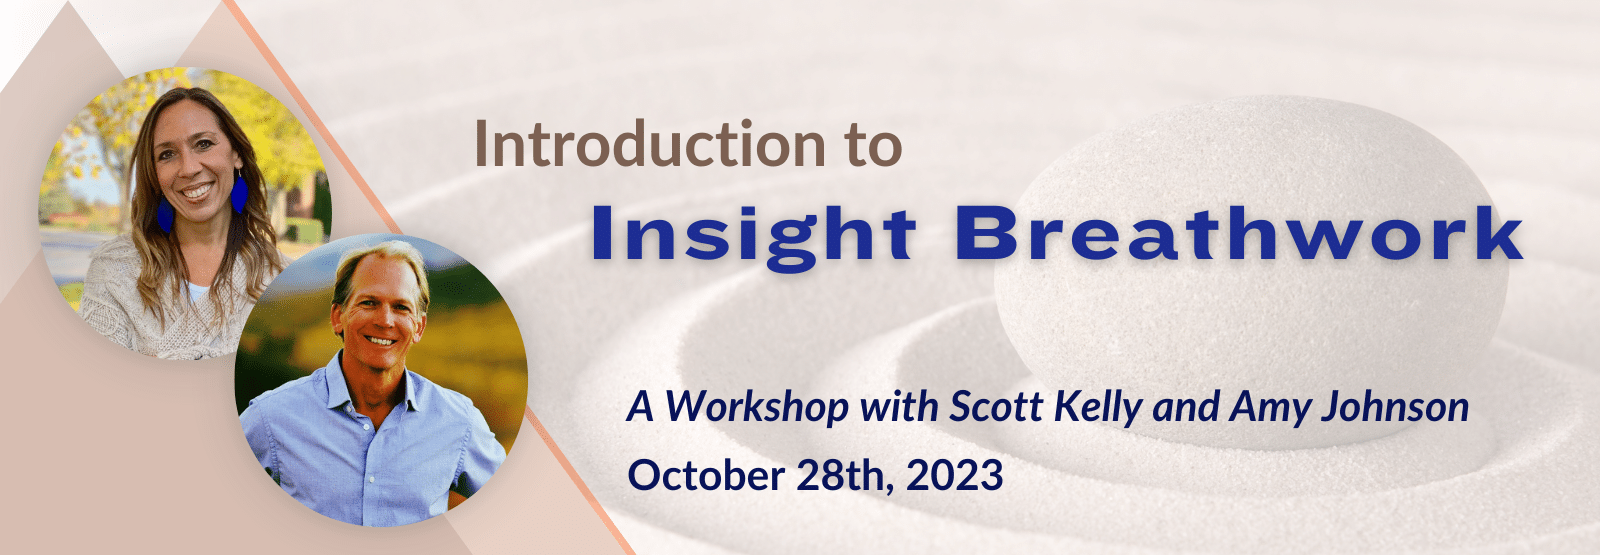 Introduction to Insight Breathwork workshop banner. Workshop is Oct 28th